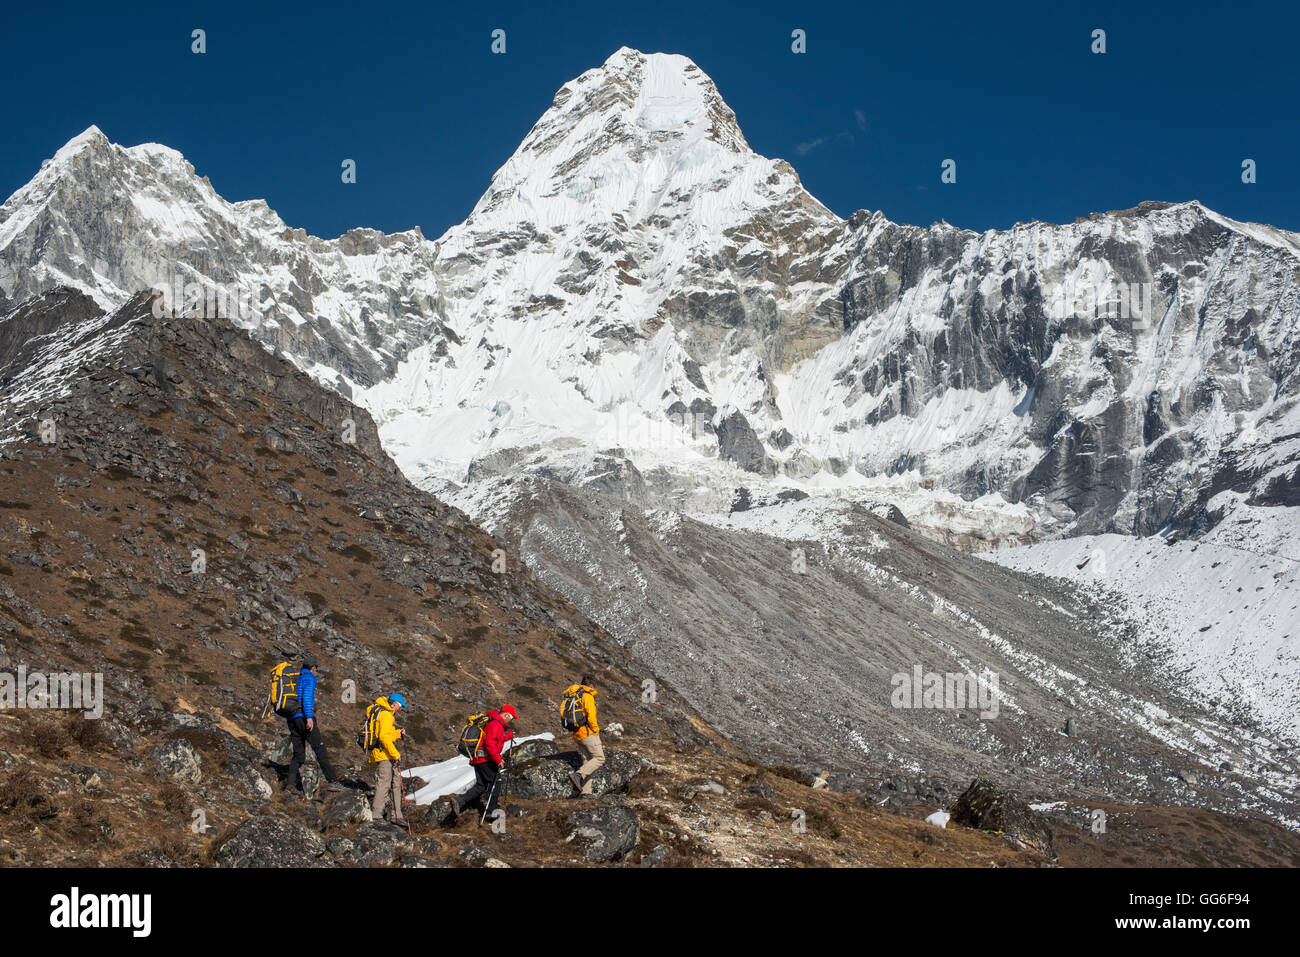 A climbing team with views of Ama Dablam, Everest region, Himalayas, Nepal, Asia Stock Photo